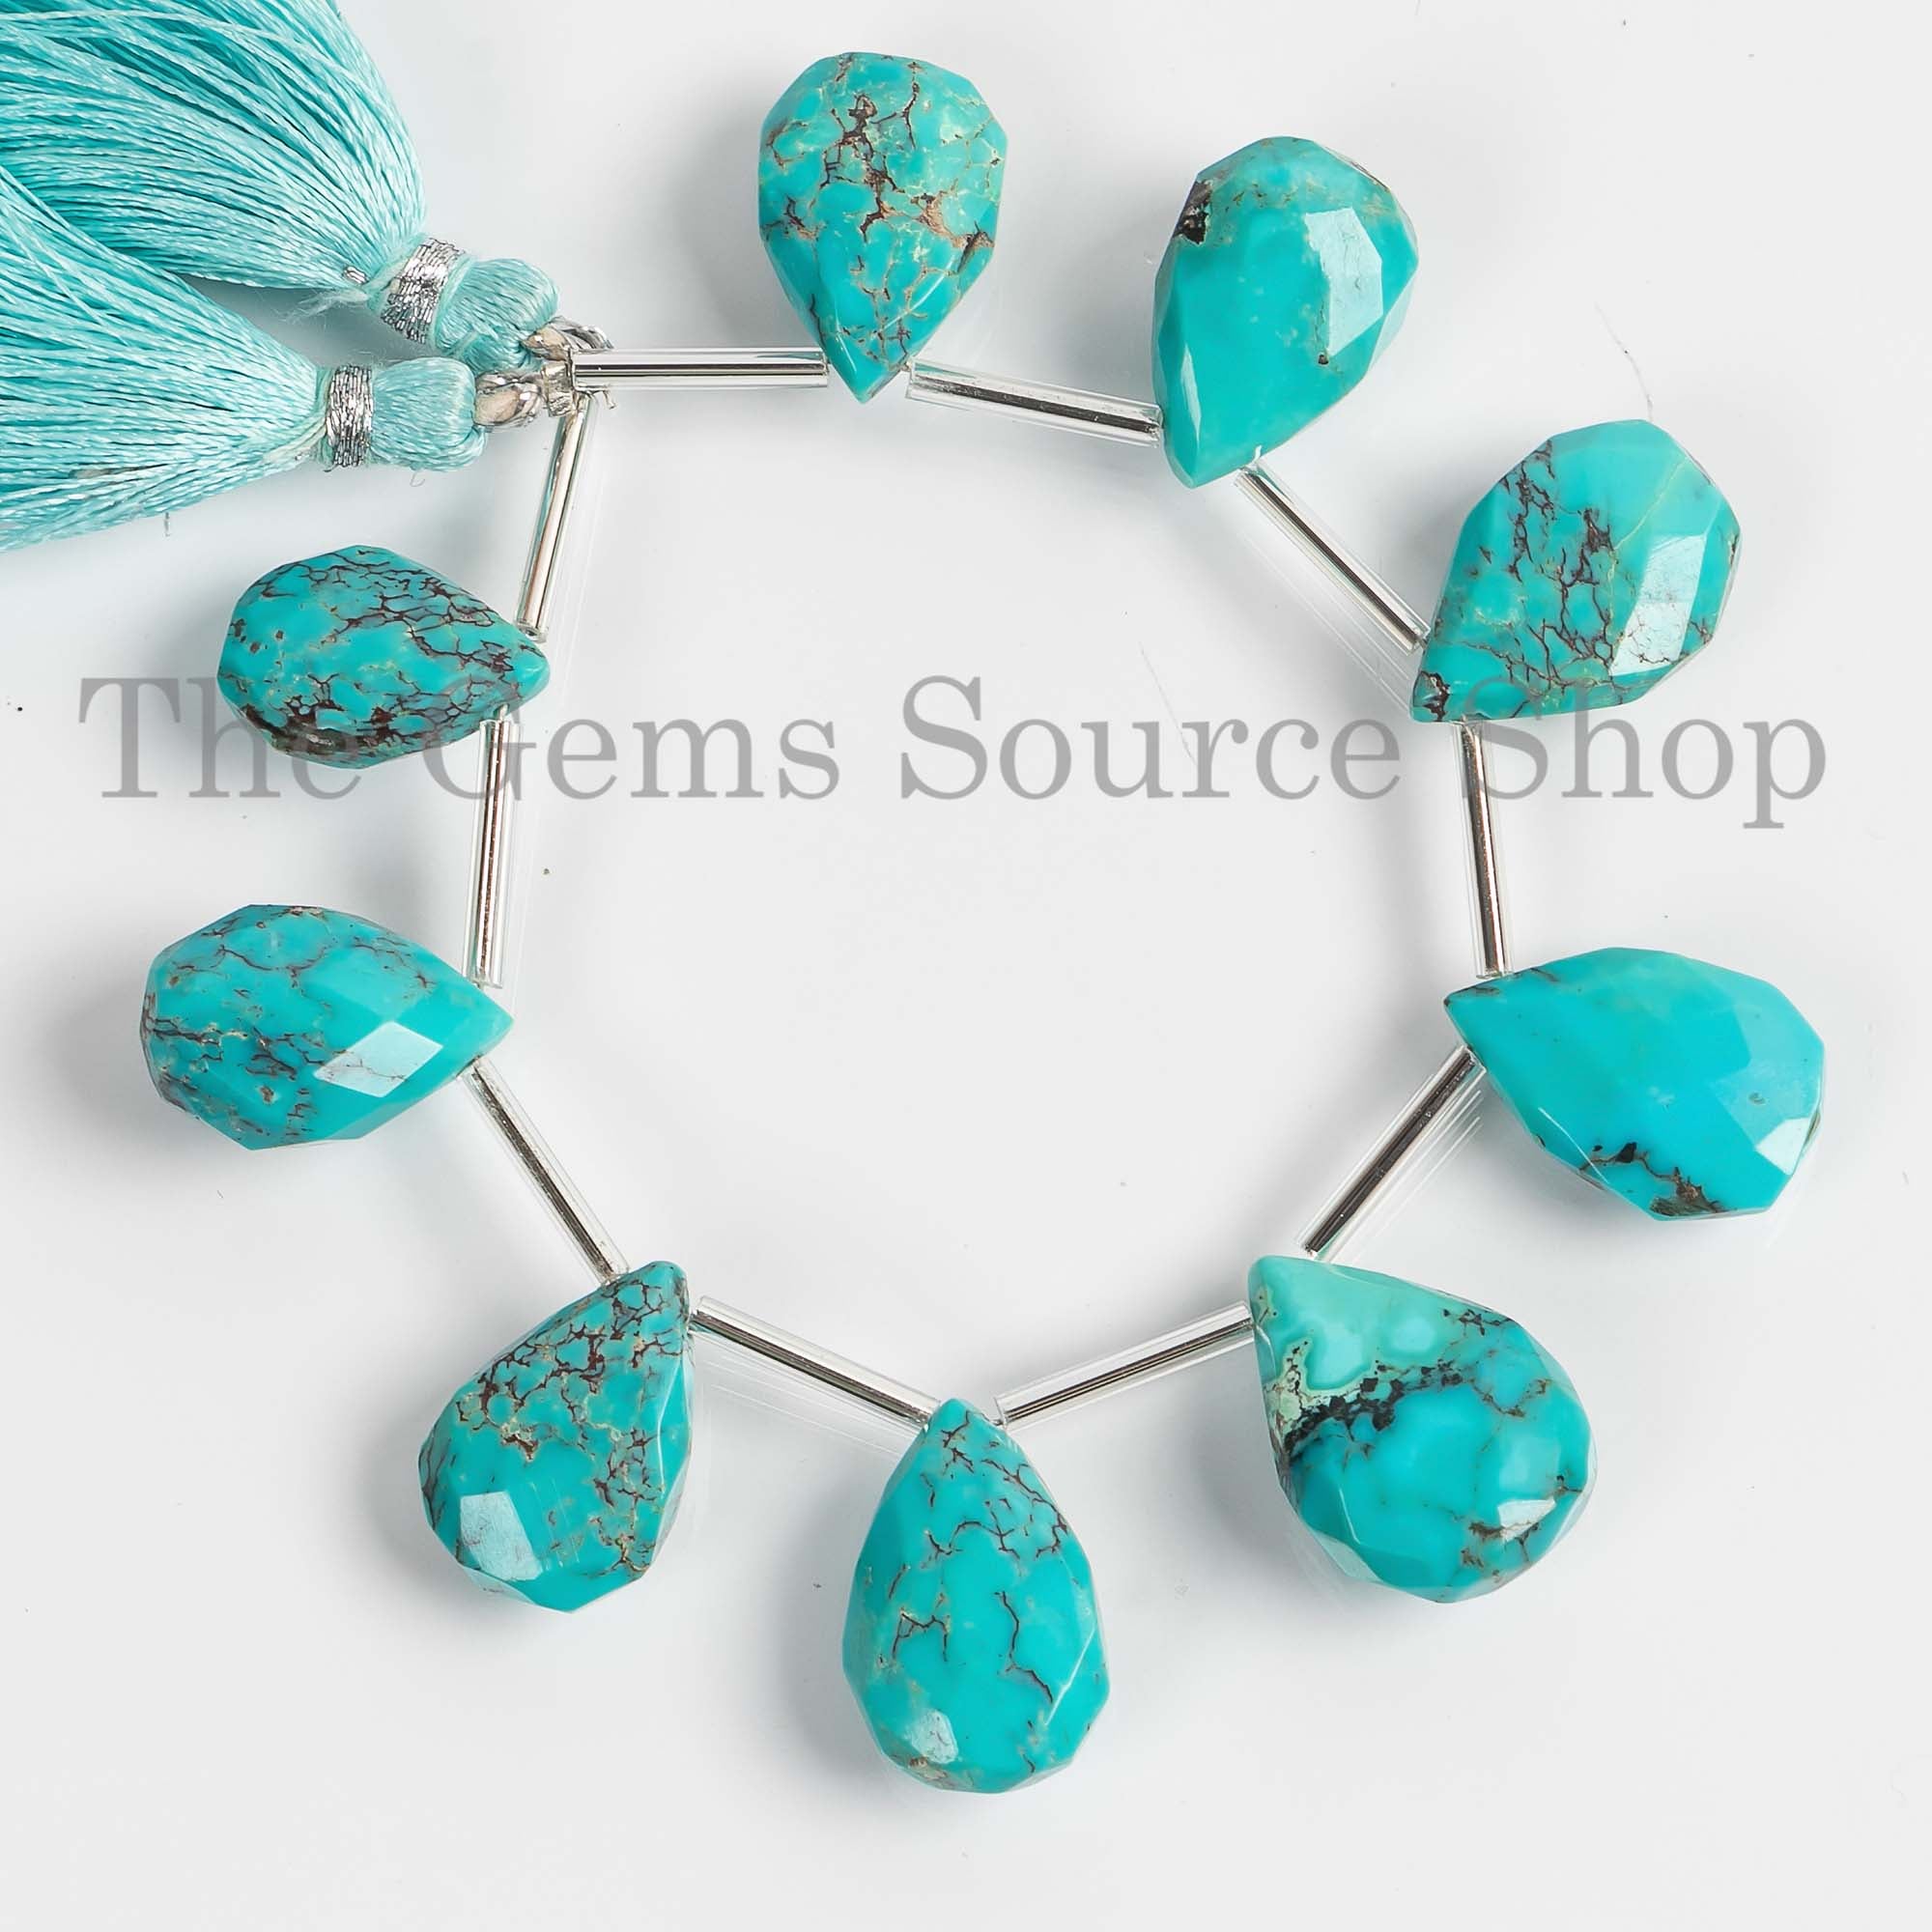 Arizona Turquoise Faceted Pear Briolette, 10.5x15.5-14x19mm Turquoise Pear Beads, Turquoise Faceted Beads, Craft Beads, Turquoise Jewelry